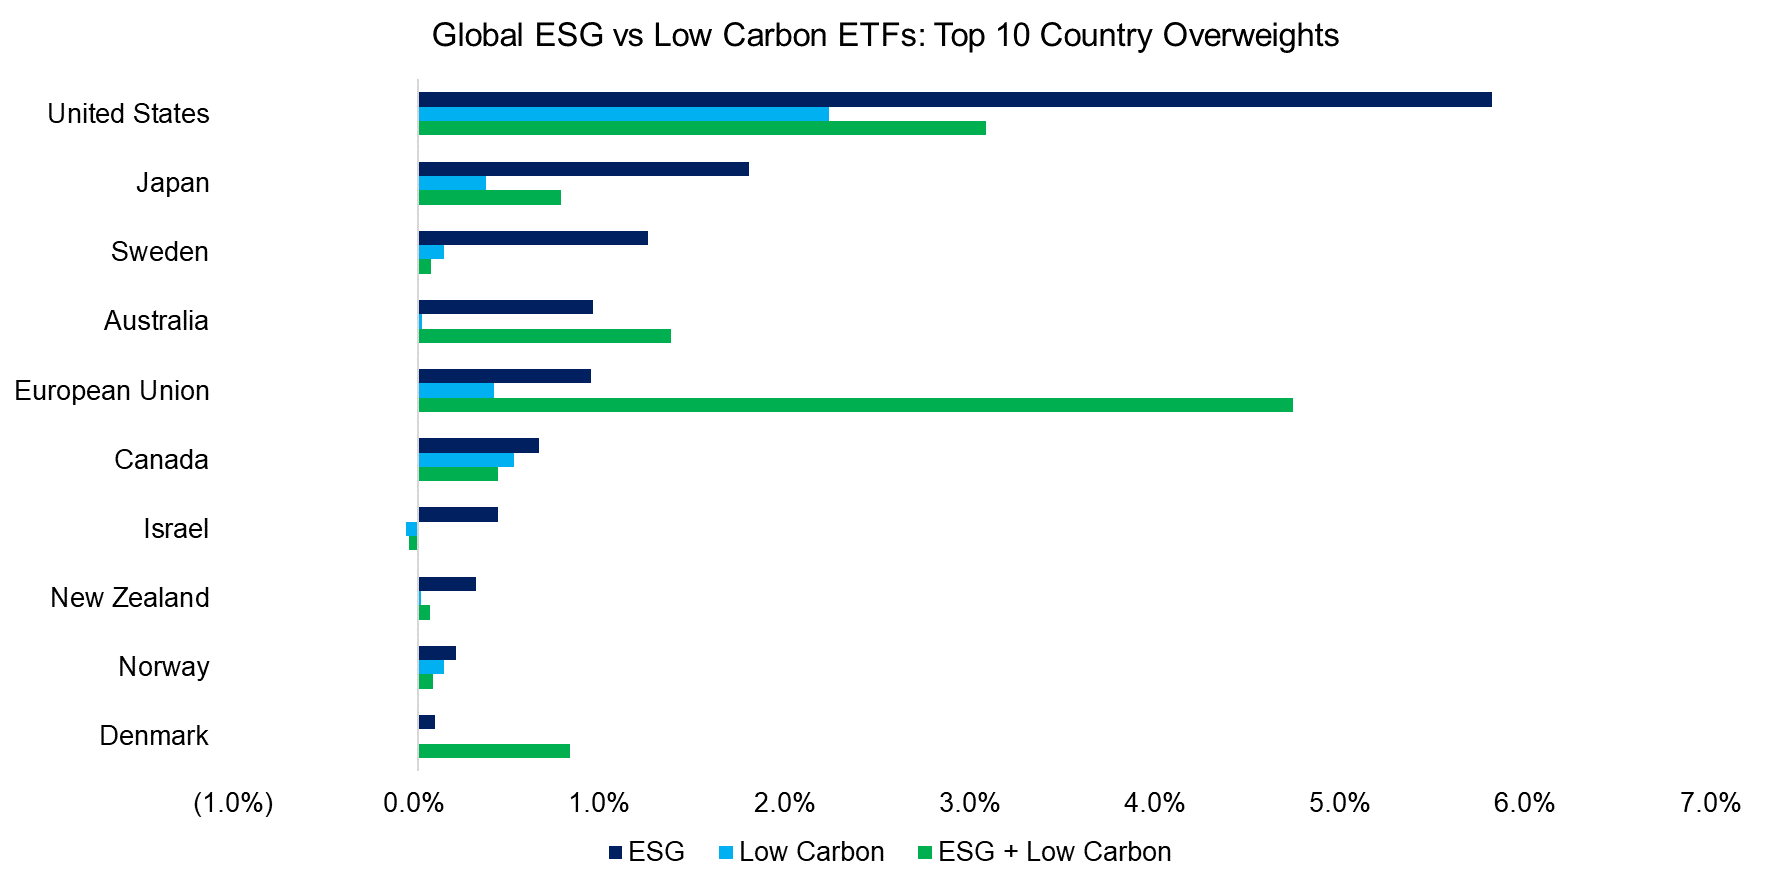 Global ESG vs Low Carbon ETFs Top 10 Country Overweights